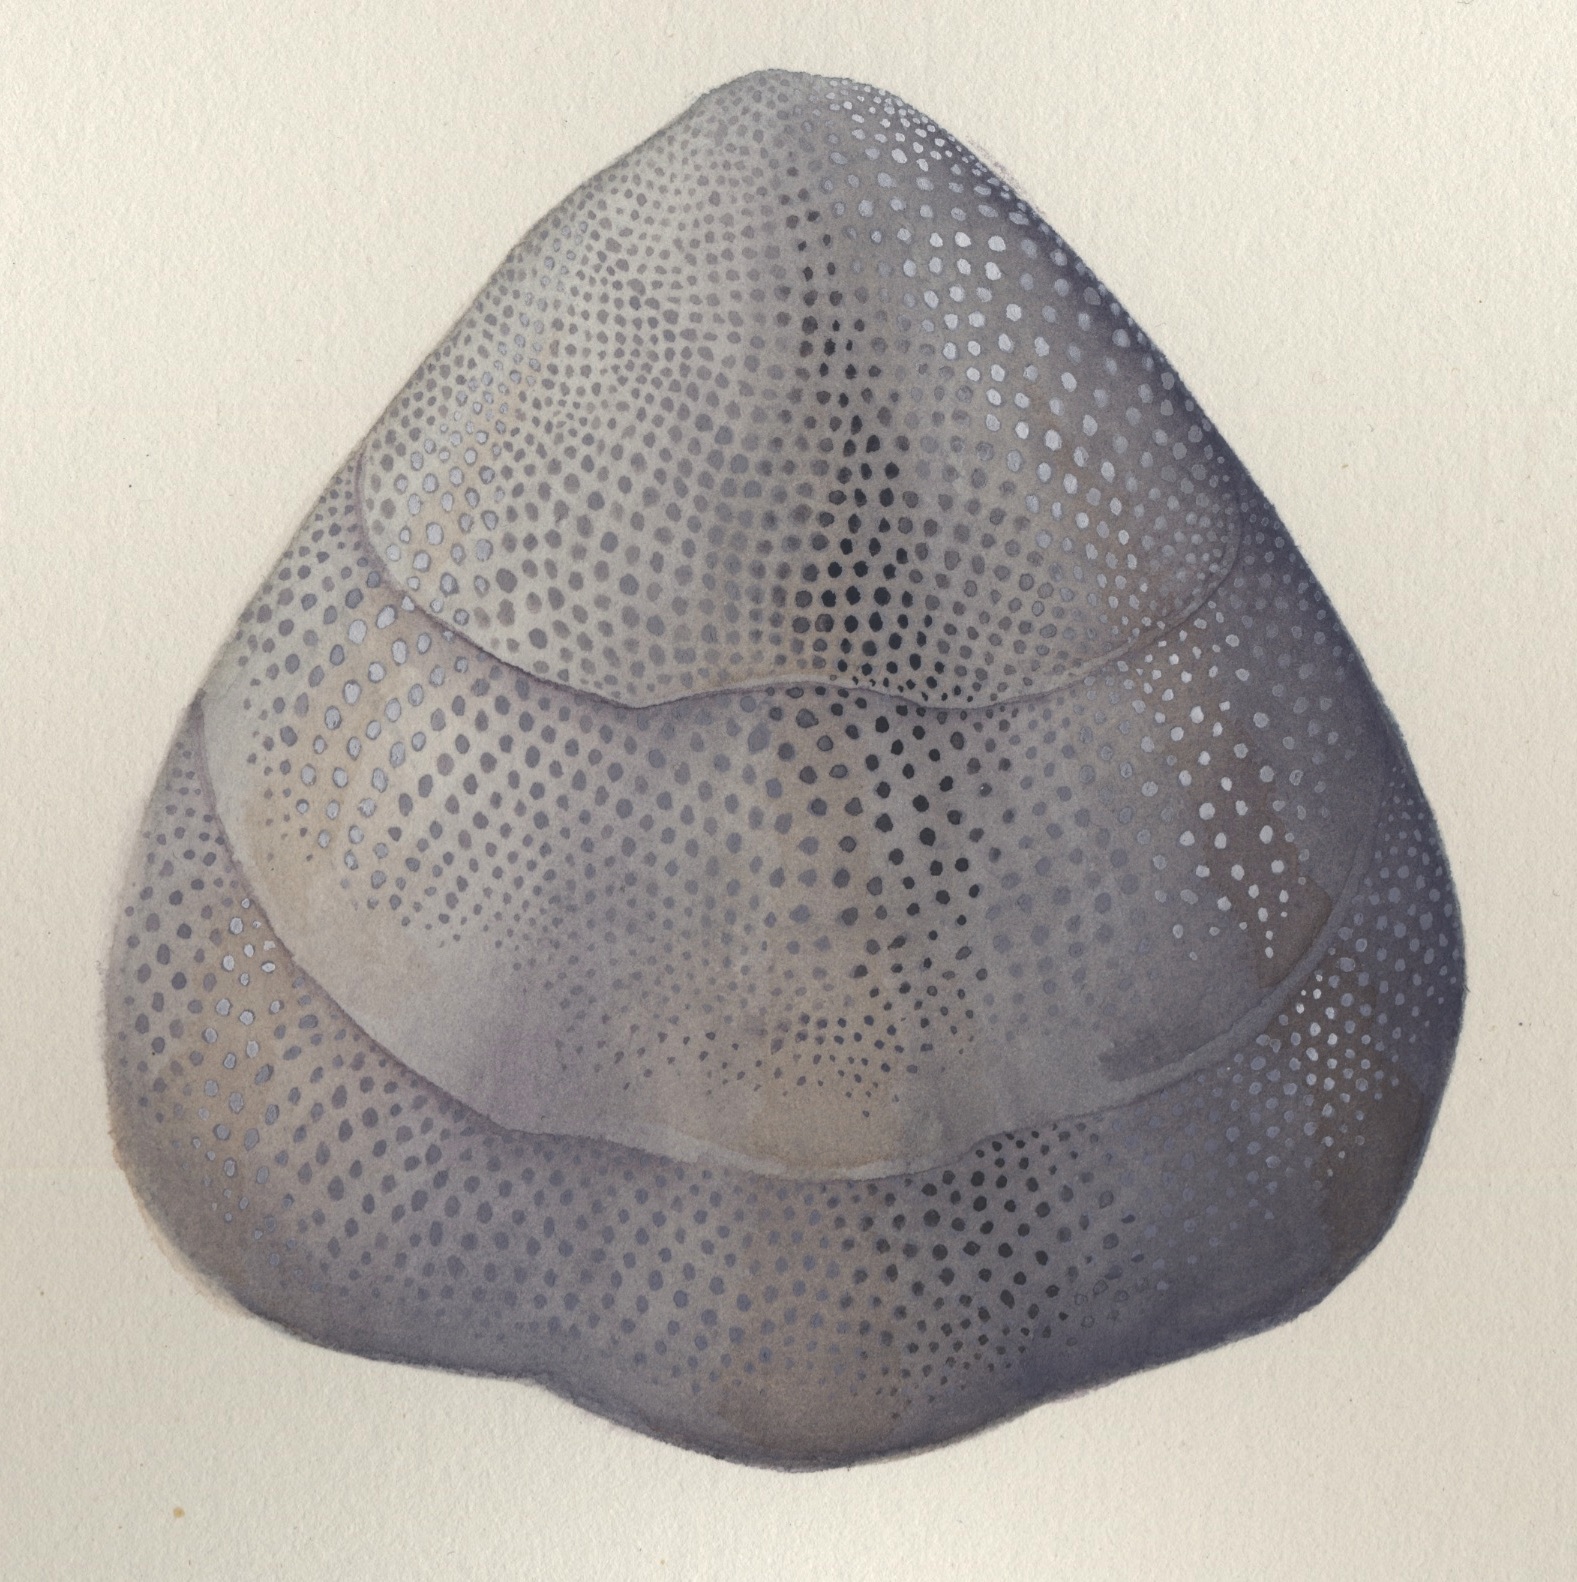 Scientific illustration by Monica Jurik of a brachiopod  based on Dictyonella reticulata from Chicago and Wisconsin. Common Silurian level bottom community brachiopod from the Chicago - Milwaukee area. The illustration is a water color based on specimens in our collections.